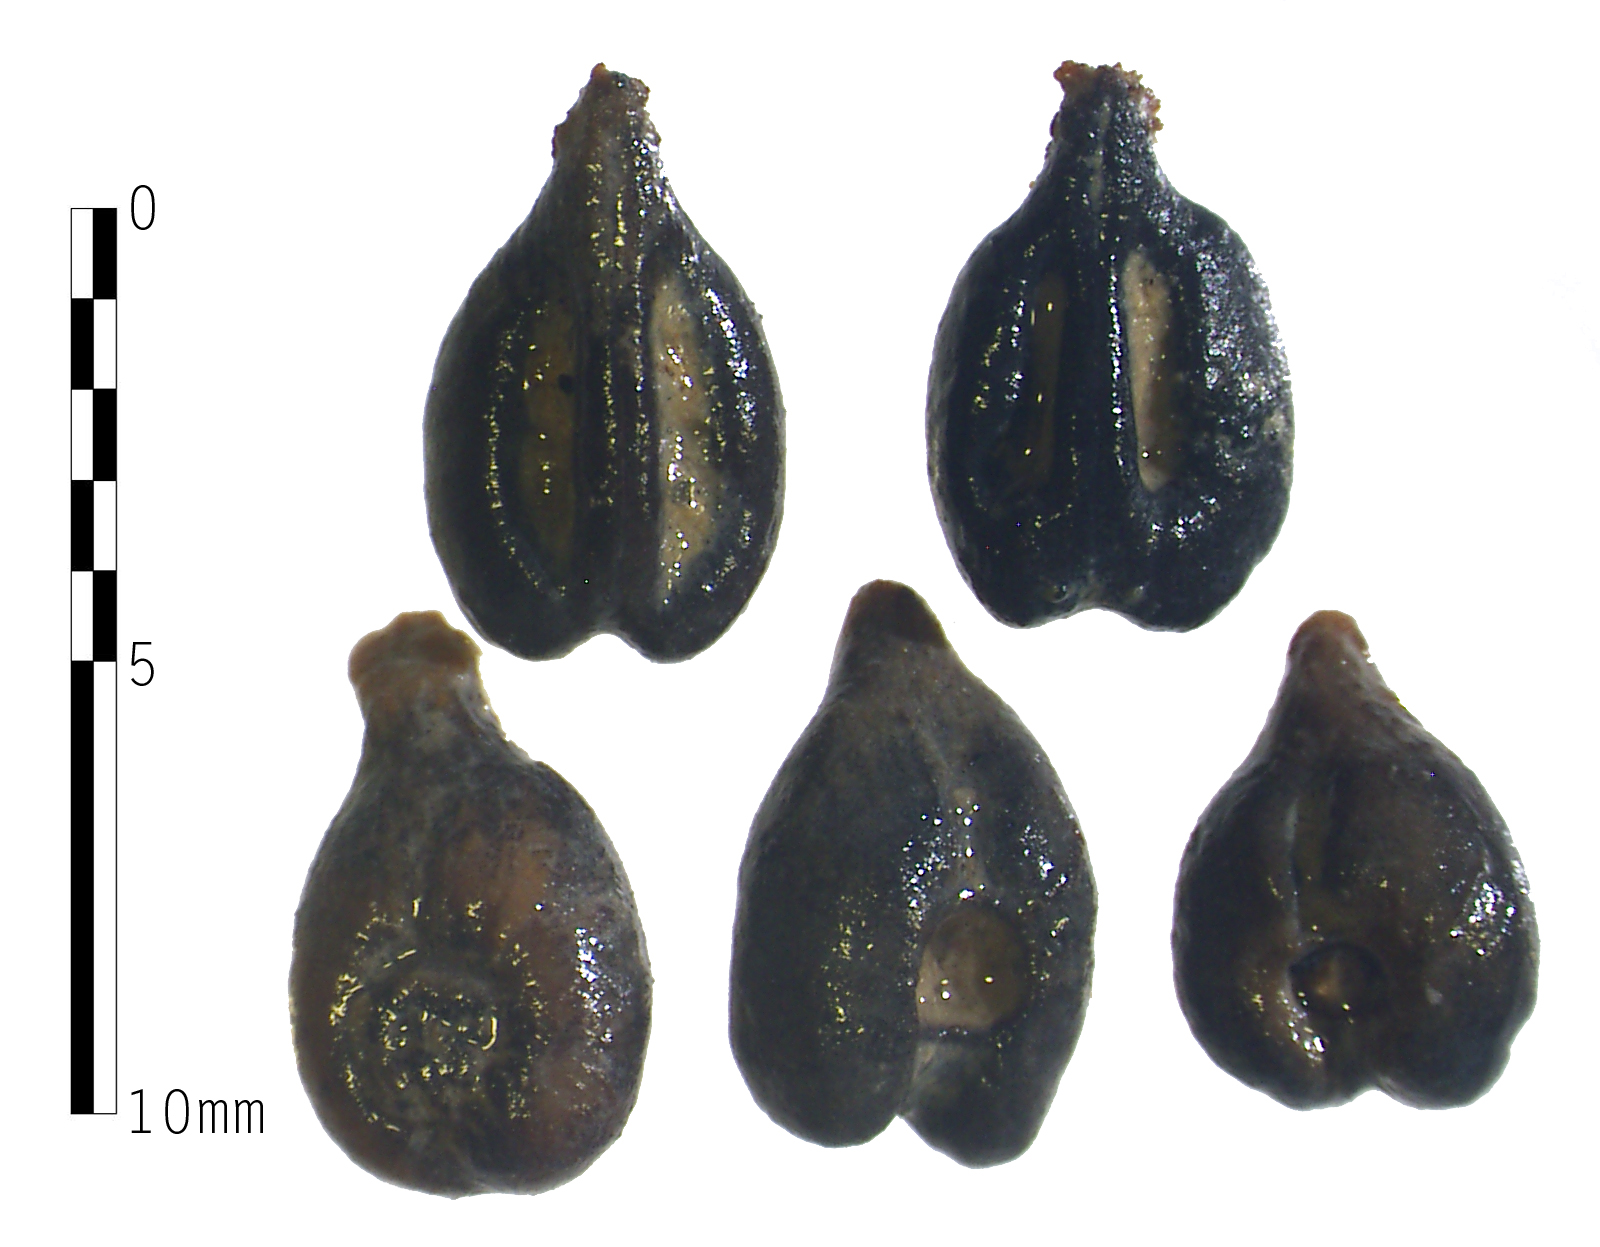 They may not look like much to the untrained eye, but these ancient Roman grape seeds, believed to back to the 1st century A.D., could provide “a real breakthrough” in the understanding of the history of Chianti vineyards in the area, de Grummond says.